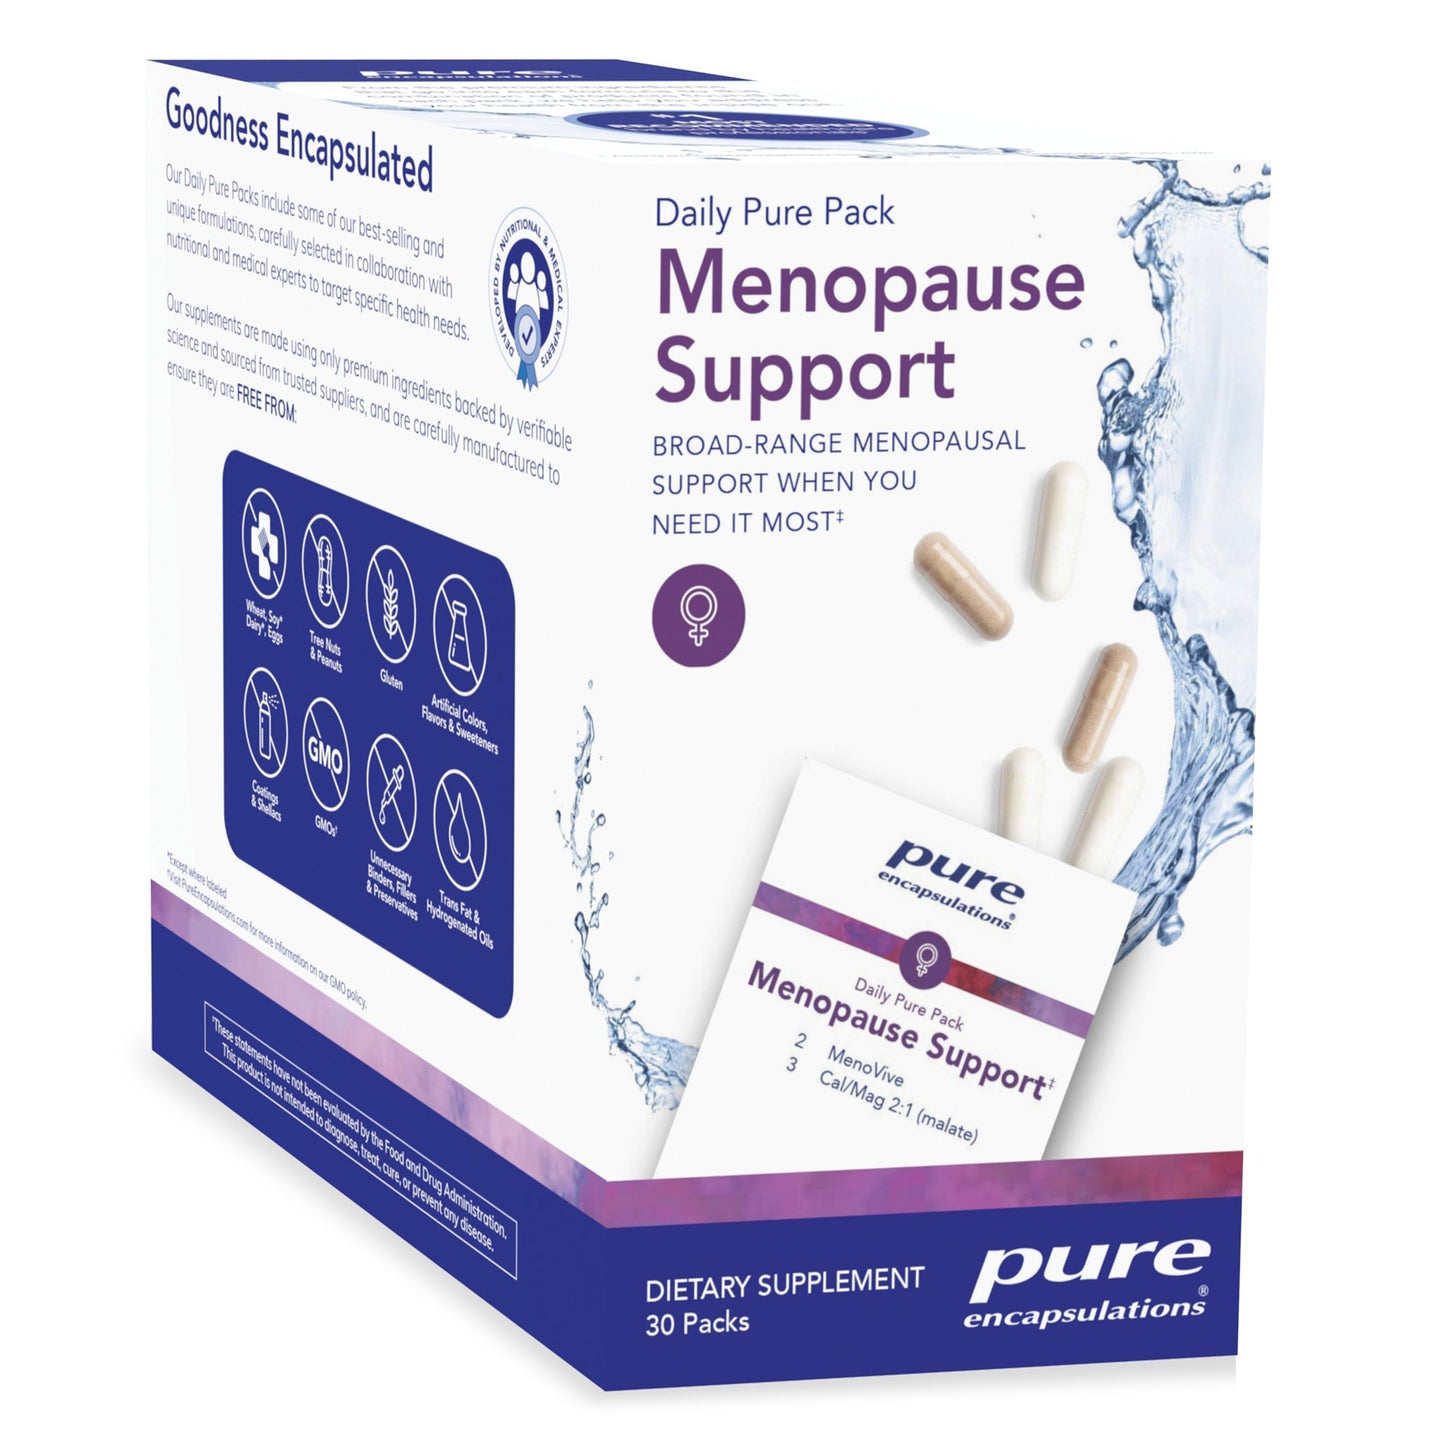 Daily Pure Pack - Menopause Support